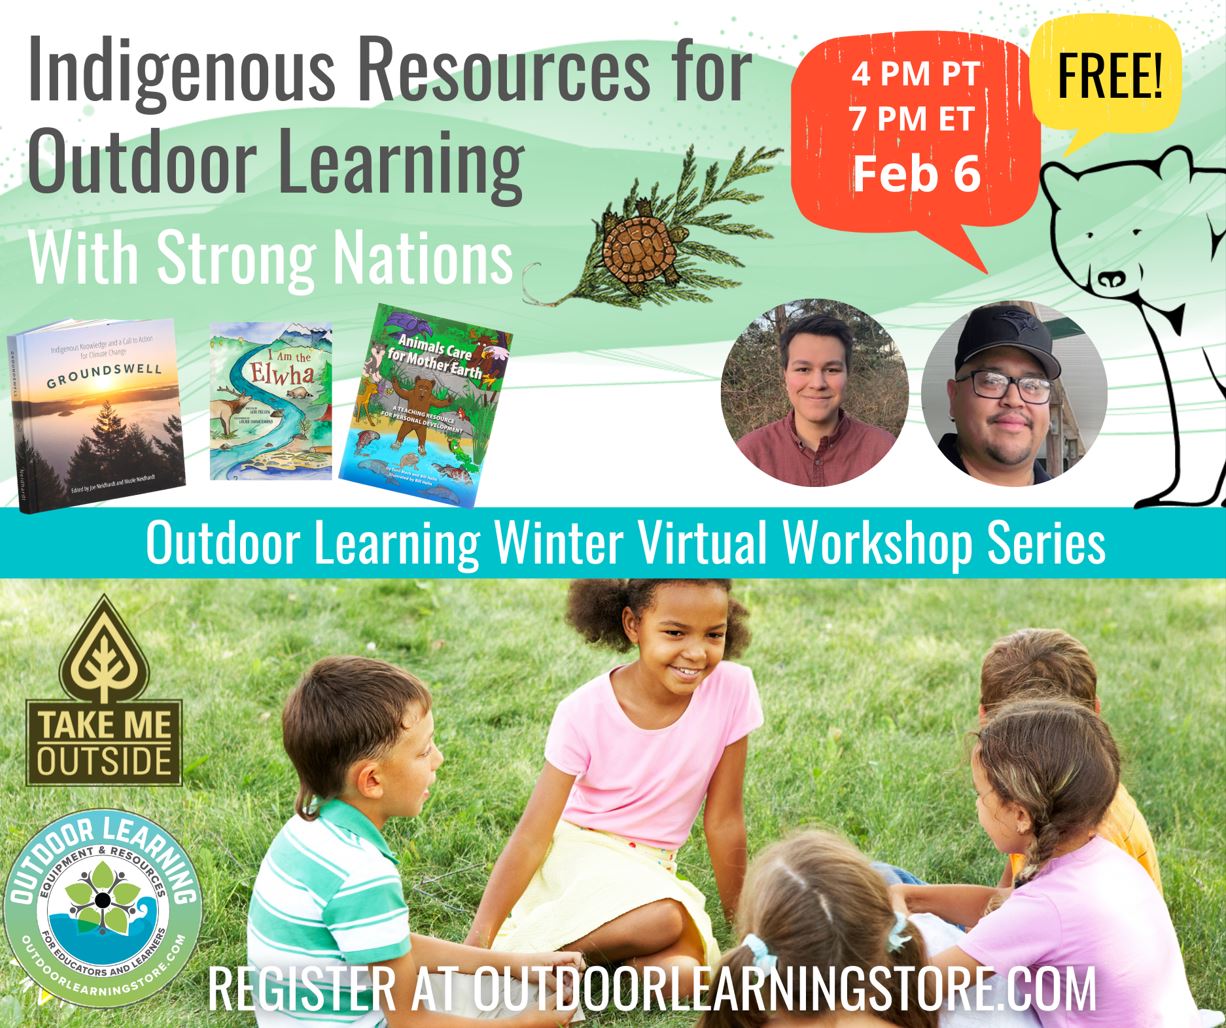 Graphic divided in half by a blue bar that says "Outdoor Learning Winter Virtual Workshop Series." Top half says "Indigenous Resources for Outdoor Learning with Strong Nations. Feb 6. Free!" Bottom half shows a photo of a group of kids huddled in a circle with the Take Me Outside and Outdoor Learning Store logos on the left.